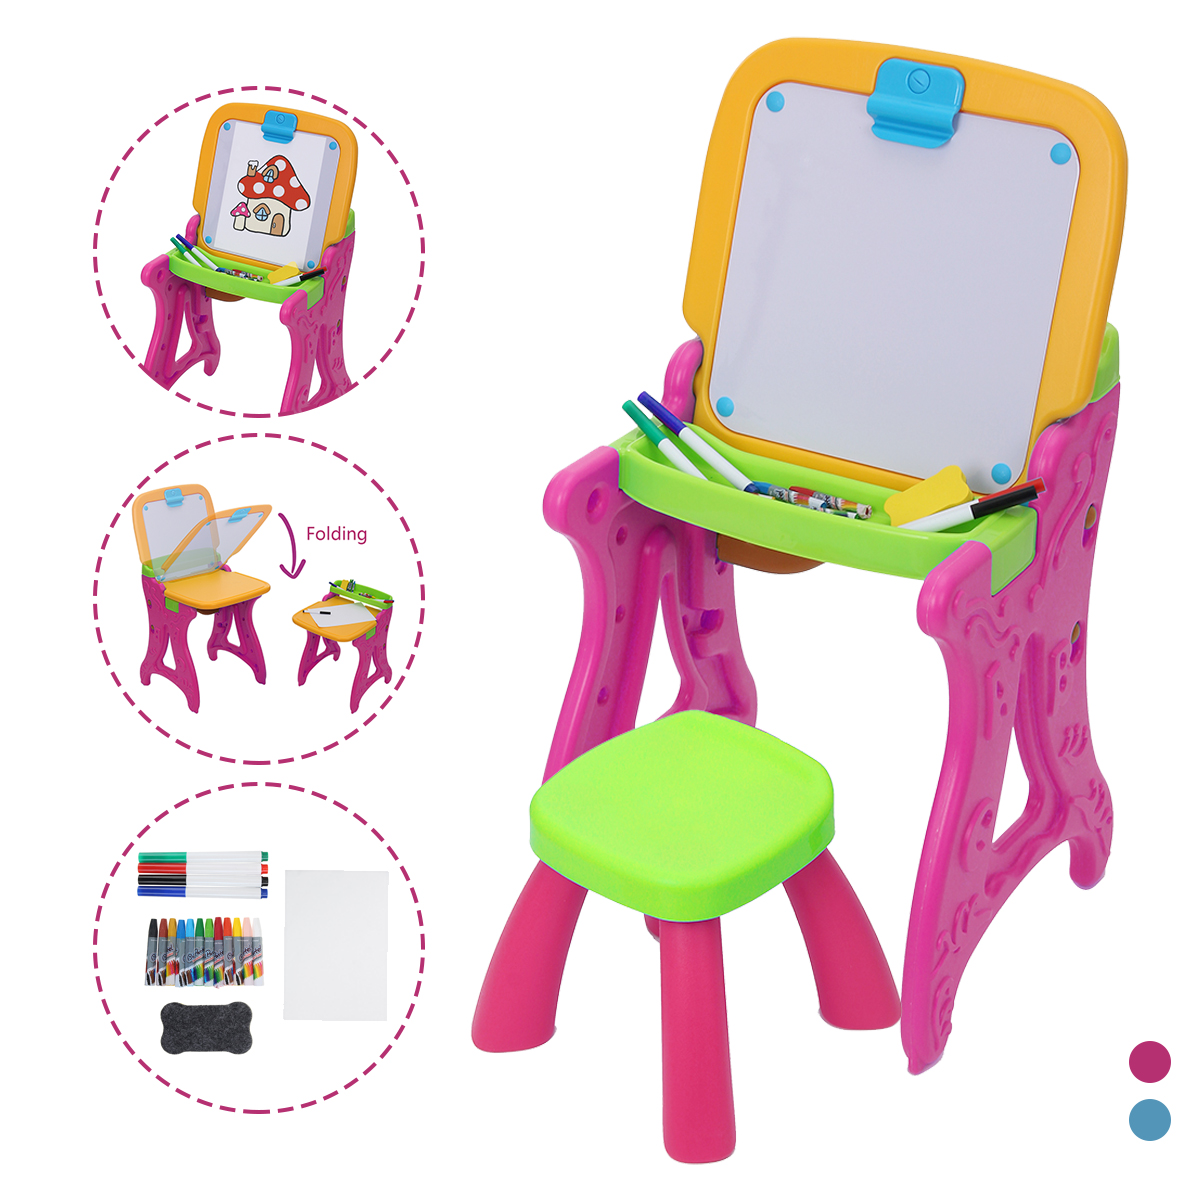 2-in-1-Folding-Drawing-Board-Table-Set-with-a-Kid-Sized-Stool-Plastic-Magnetic-Writing-White-Board-I-1853465-2